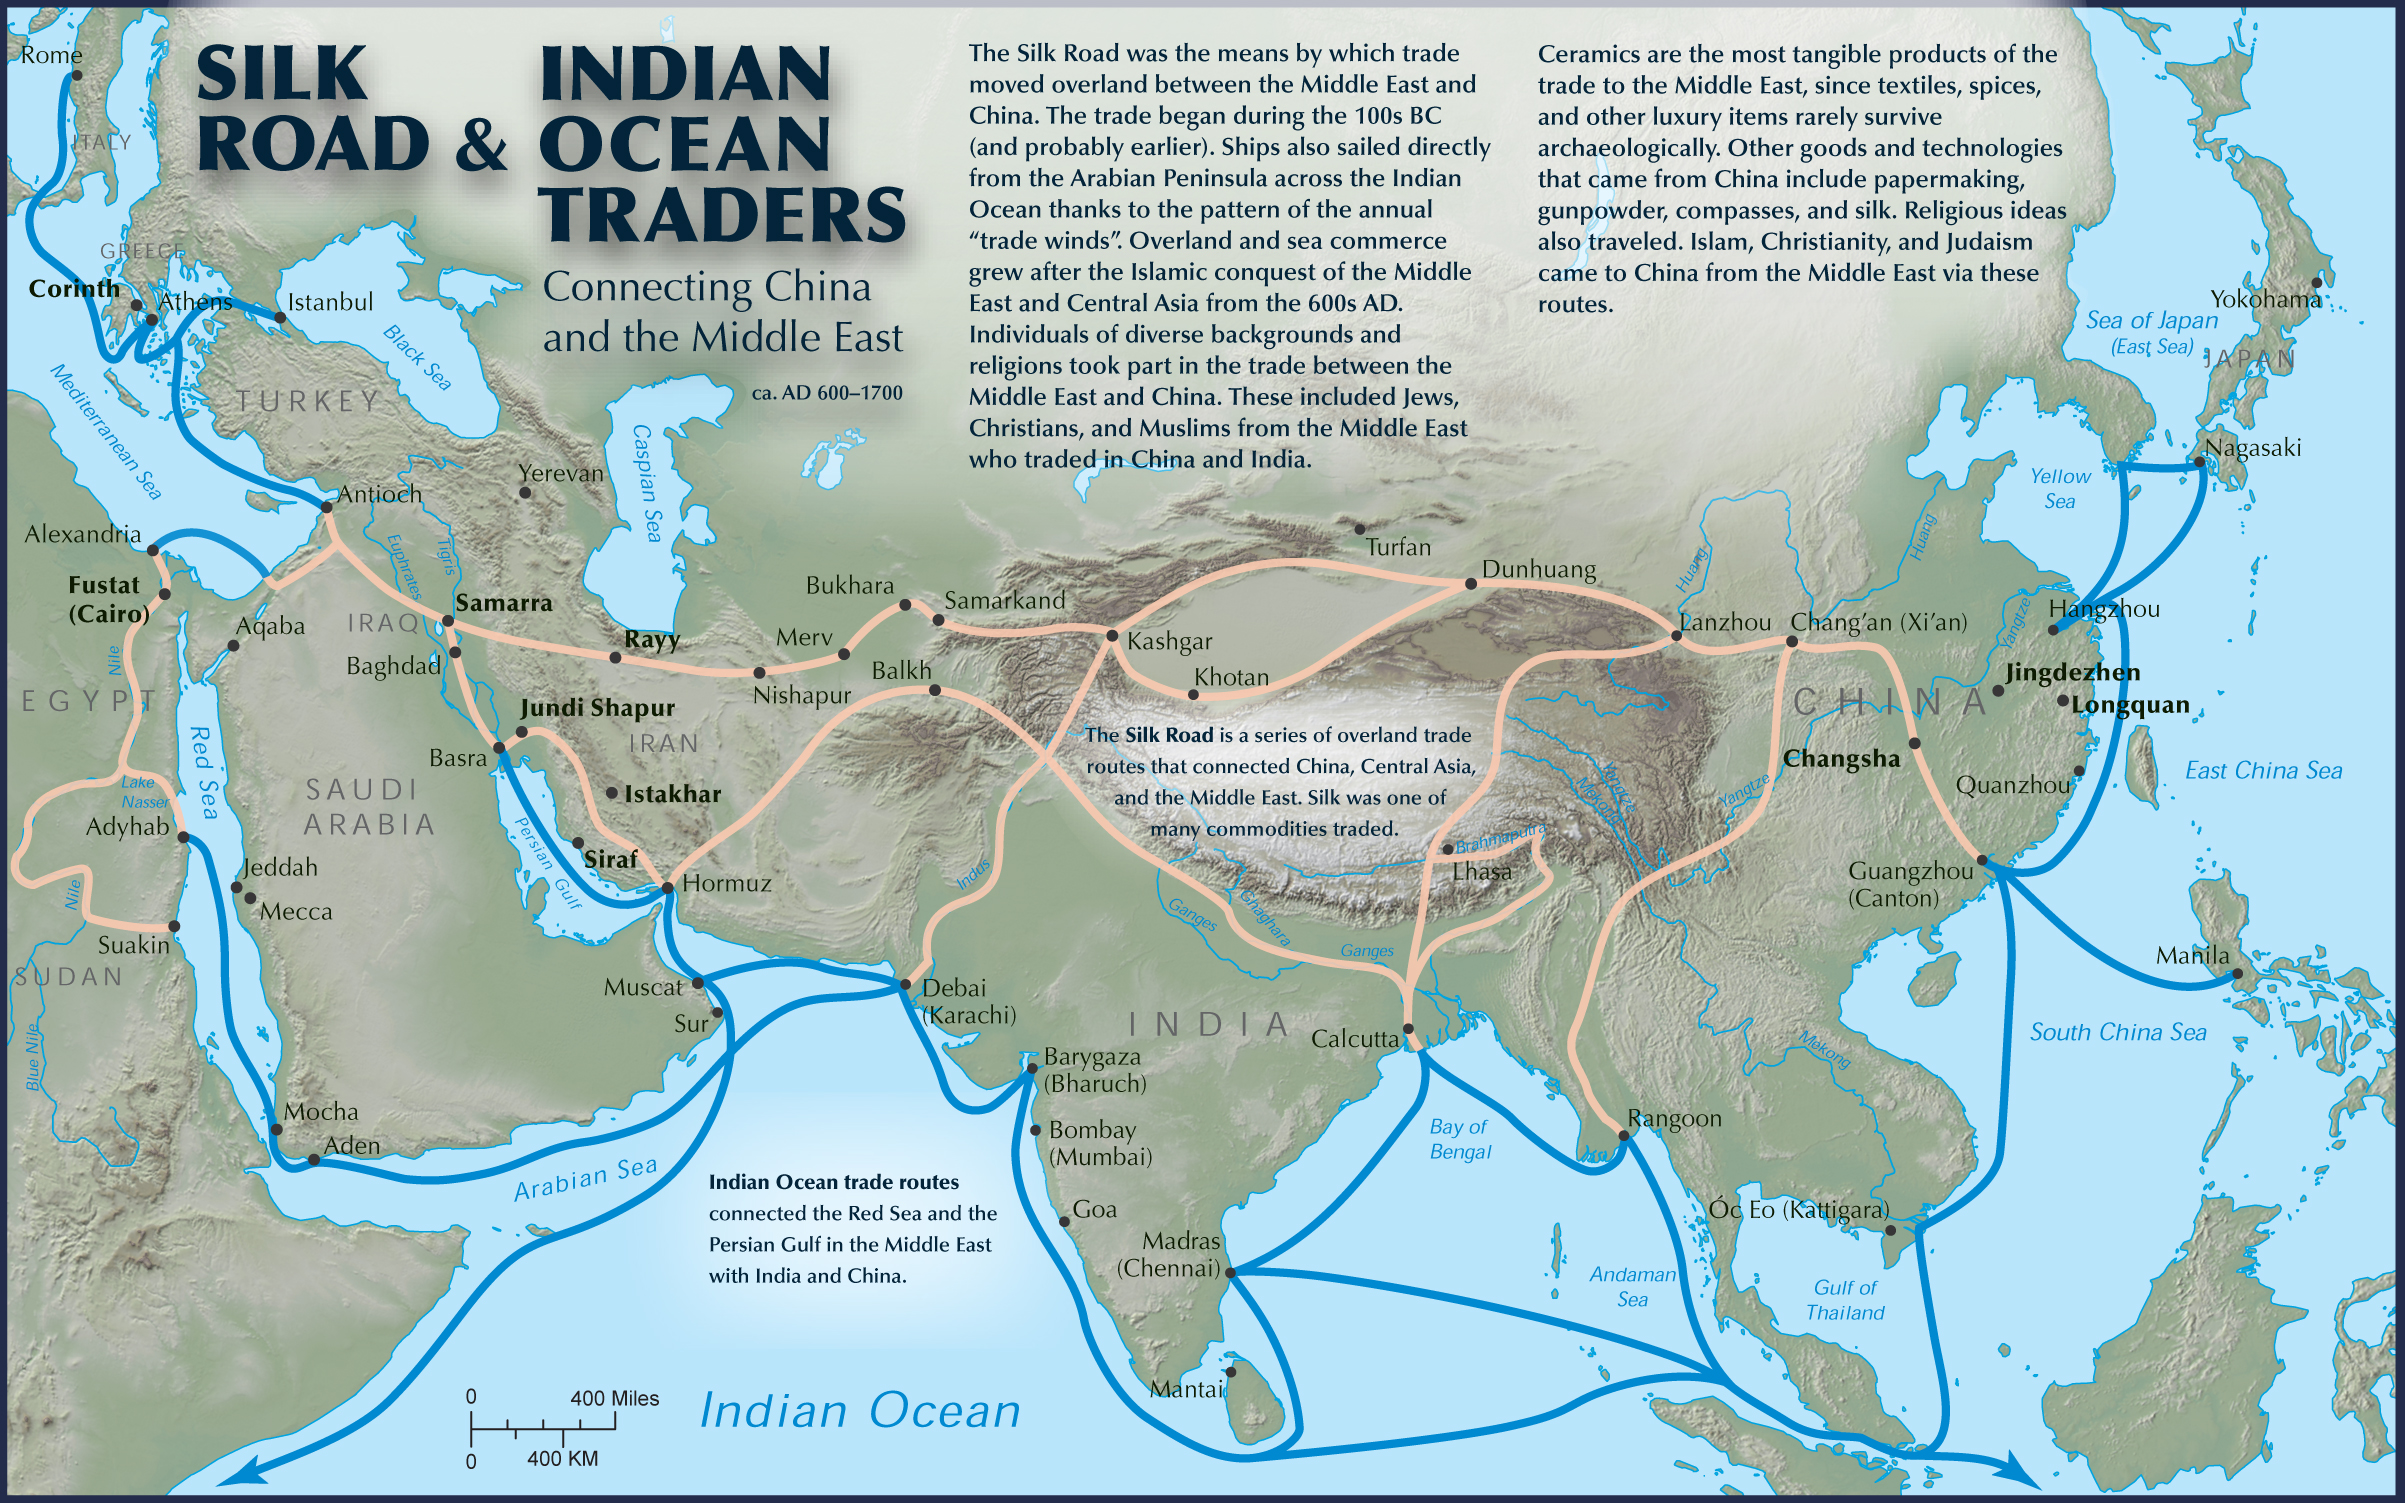 The Silk Road: Trade Route Between East and West